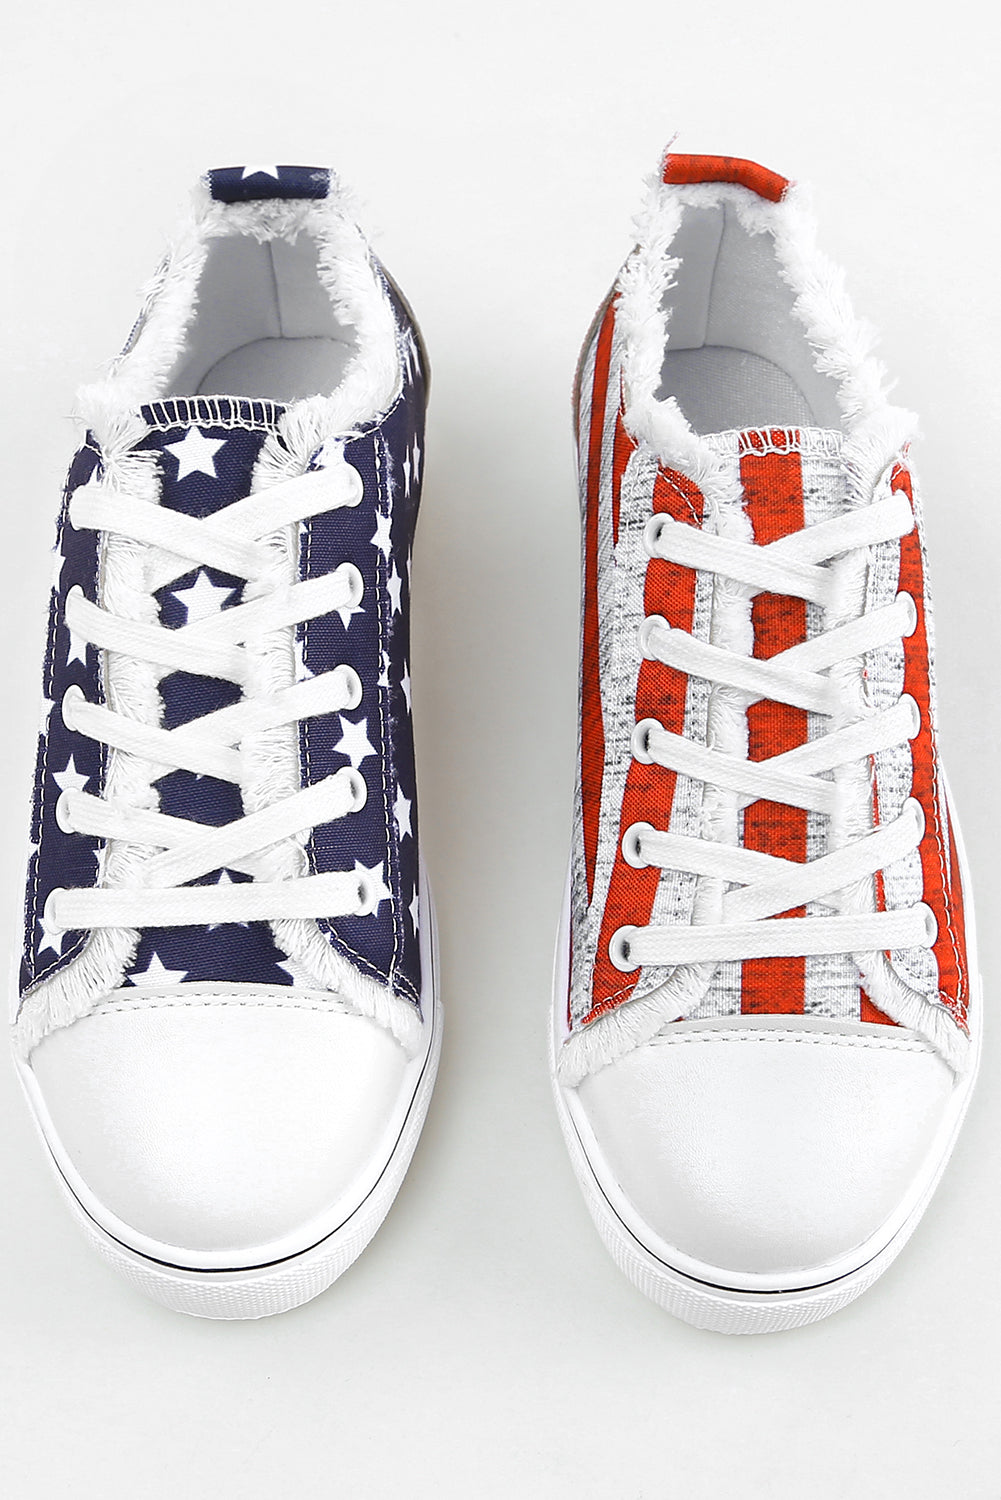 a pair of white and blue sneakers with red, white, and blue laces